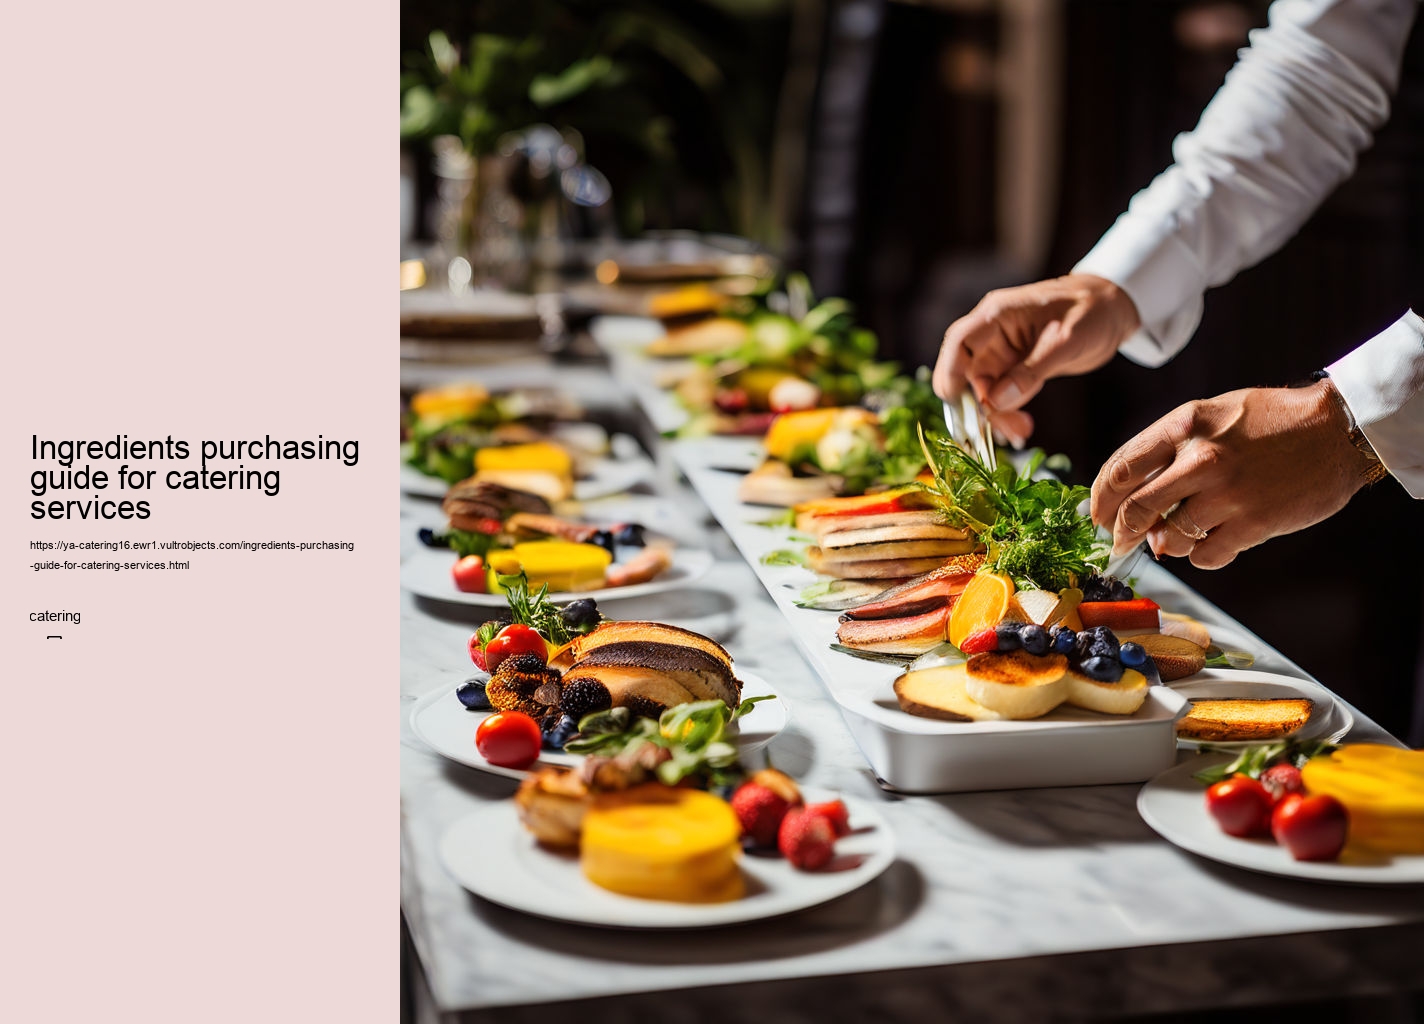 Ingredients purchasing guide for catering services